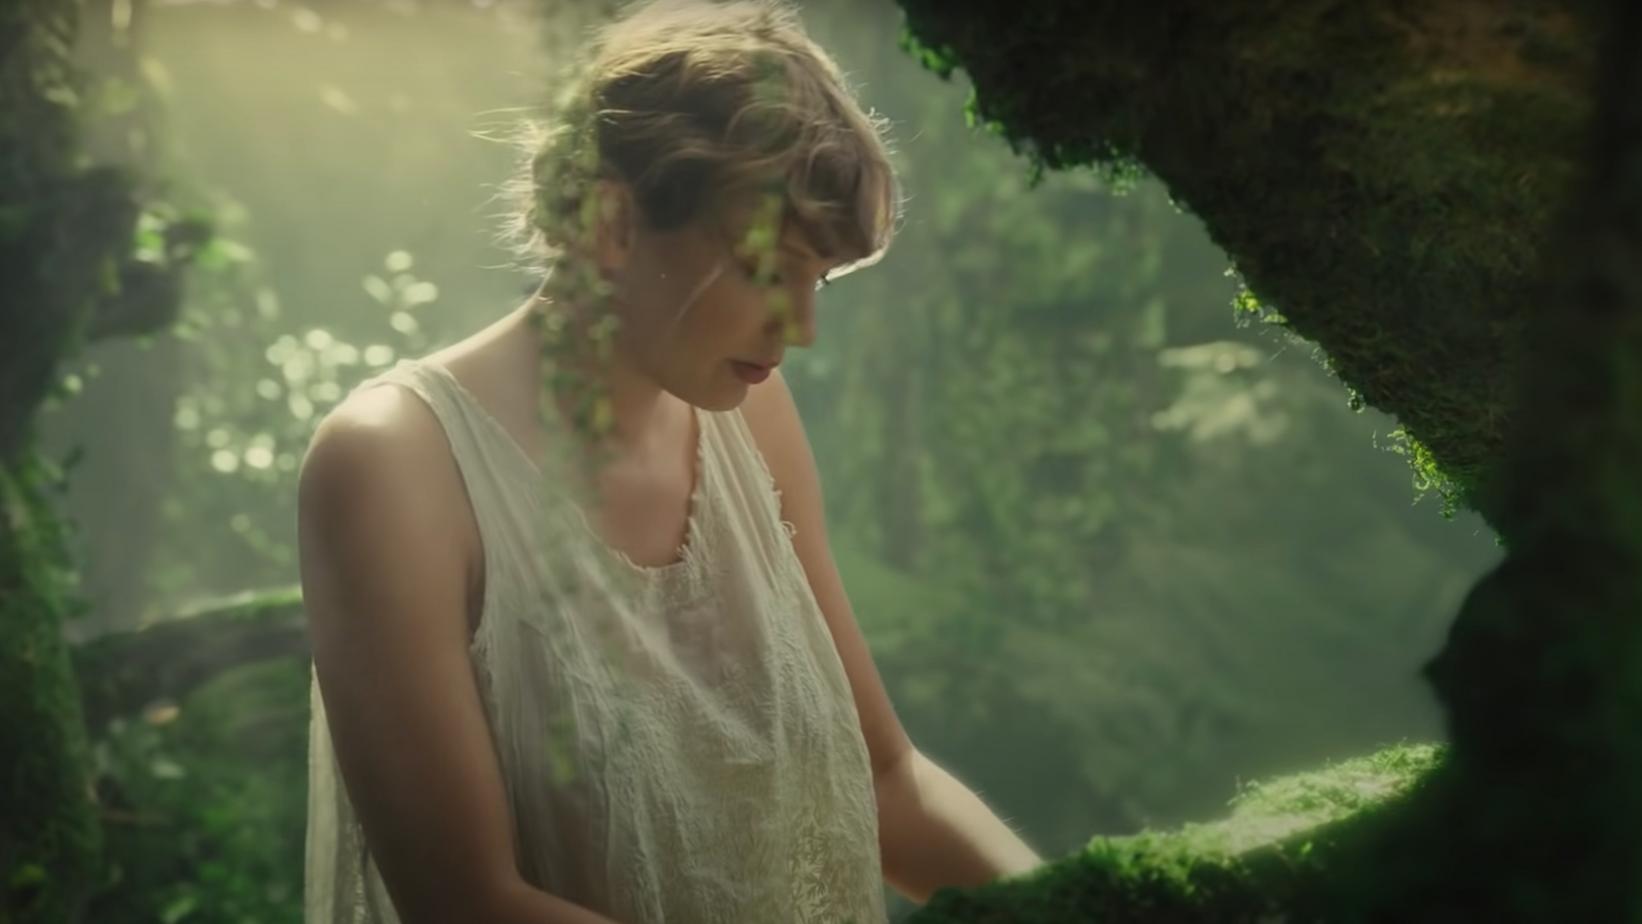 Folklore Taylor Swift At Her Best While The World Is At Its Worst